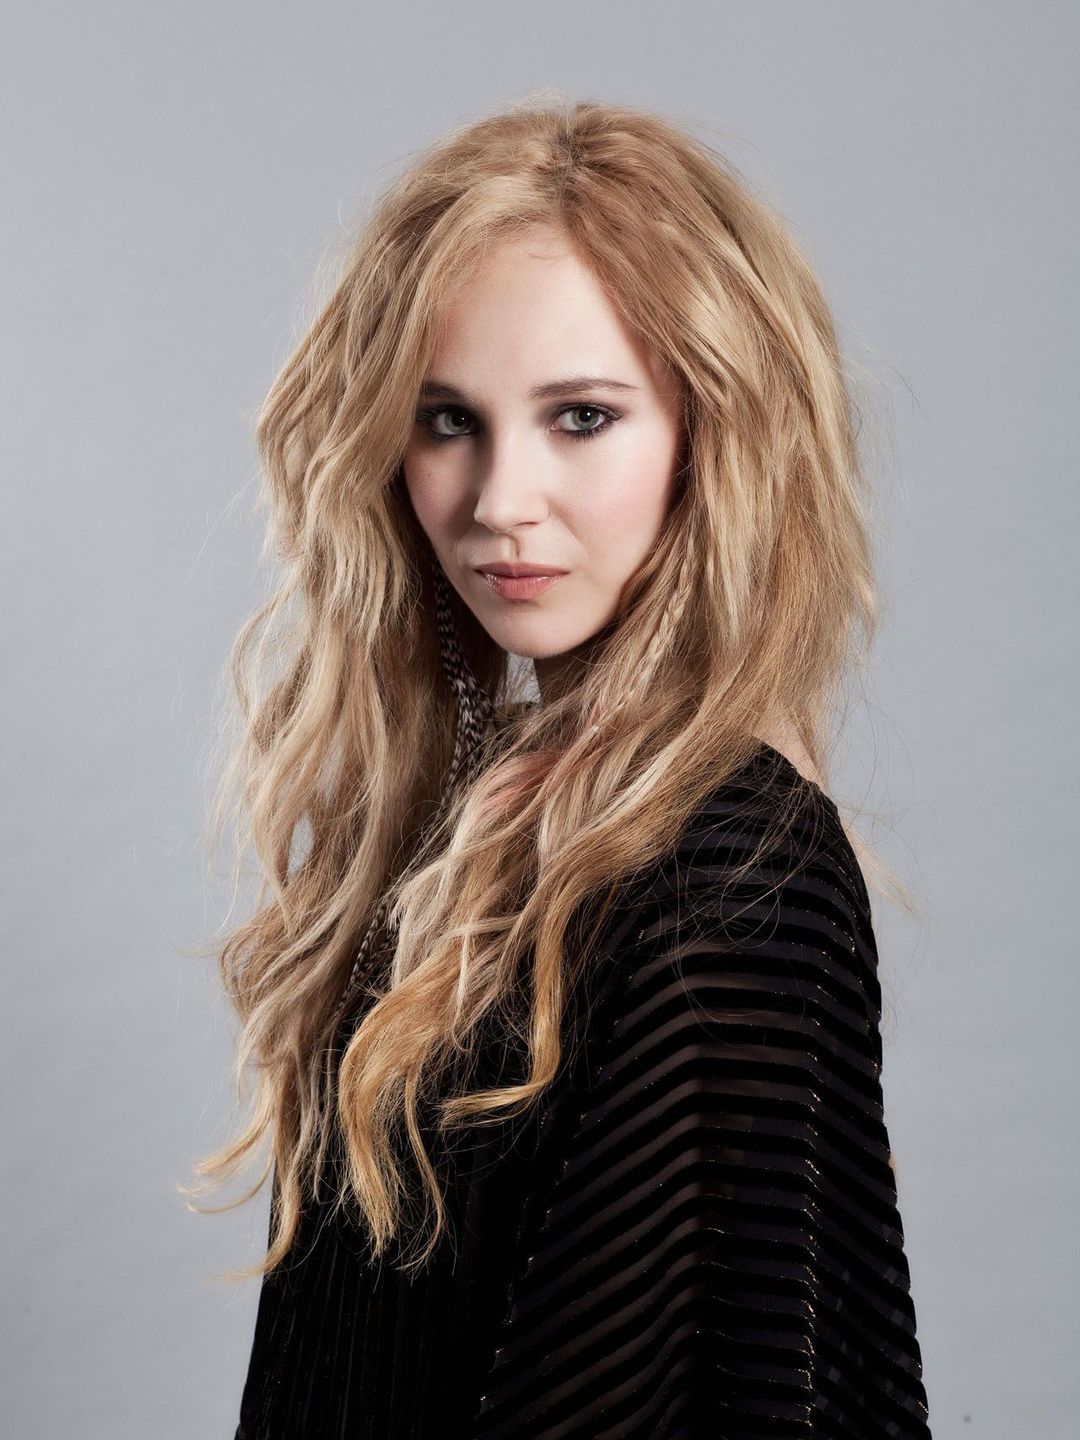 Juno Temple early life